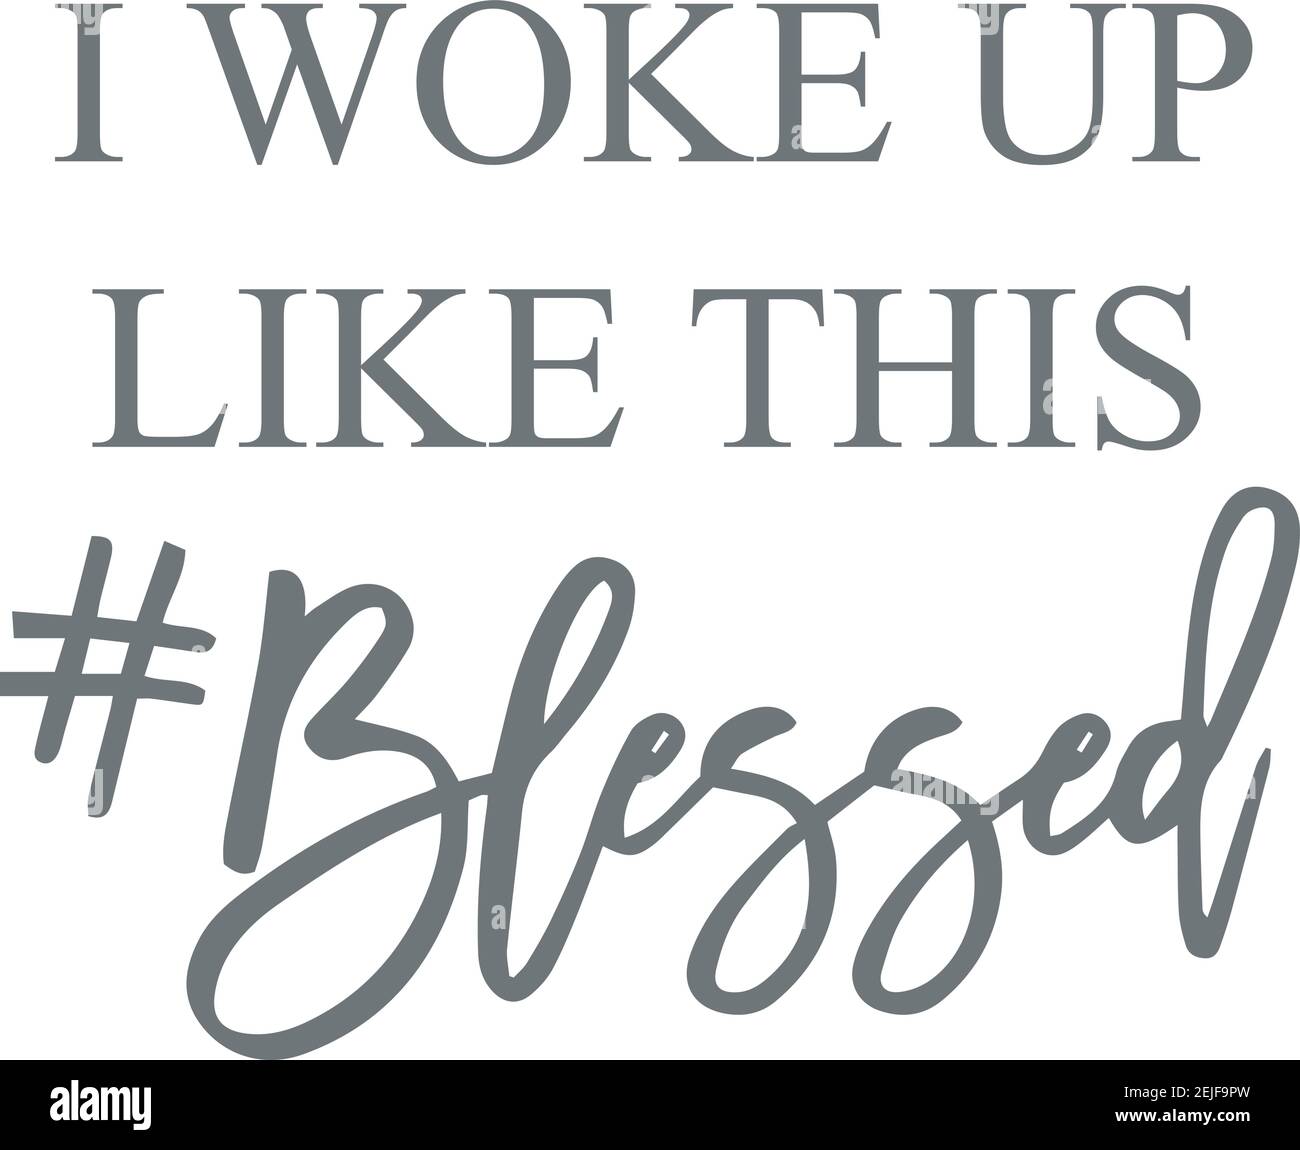 I Woke Up Like This Blessed Logo Sign Inspirational Quotes And Motivational Typography Art Lettering Composition Design Stock Vector Image & Art - Alamy